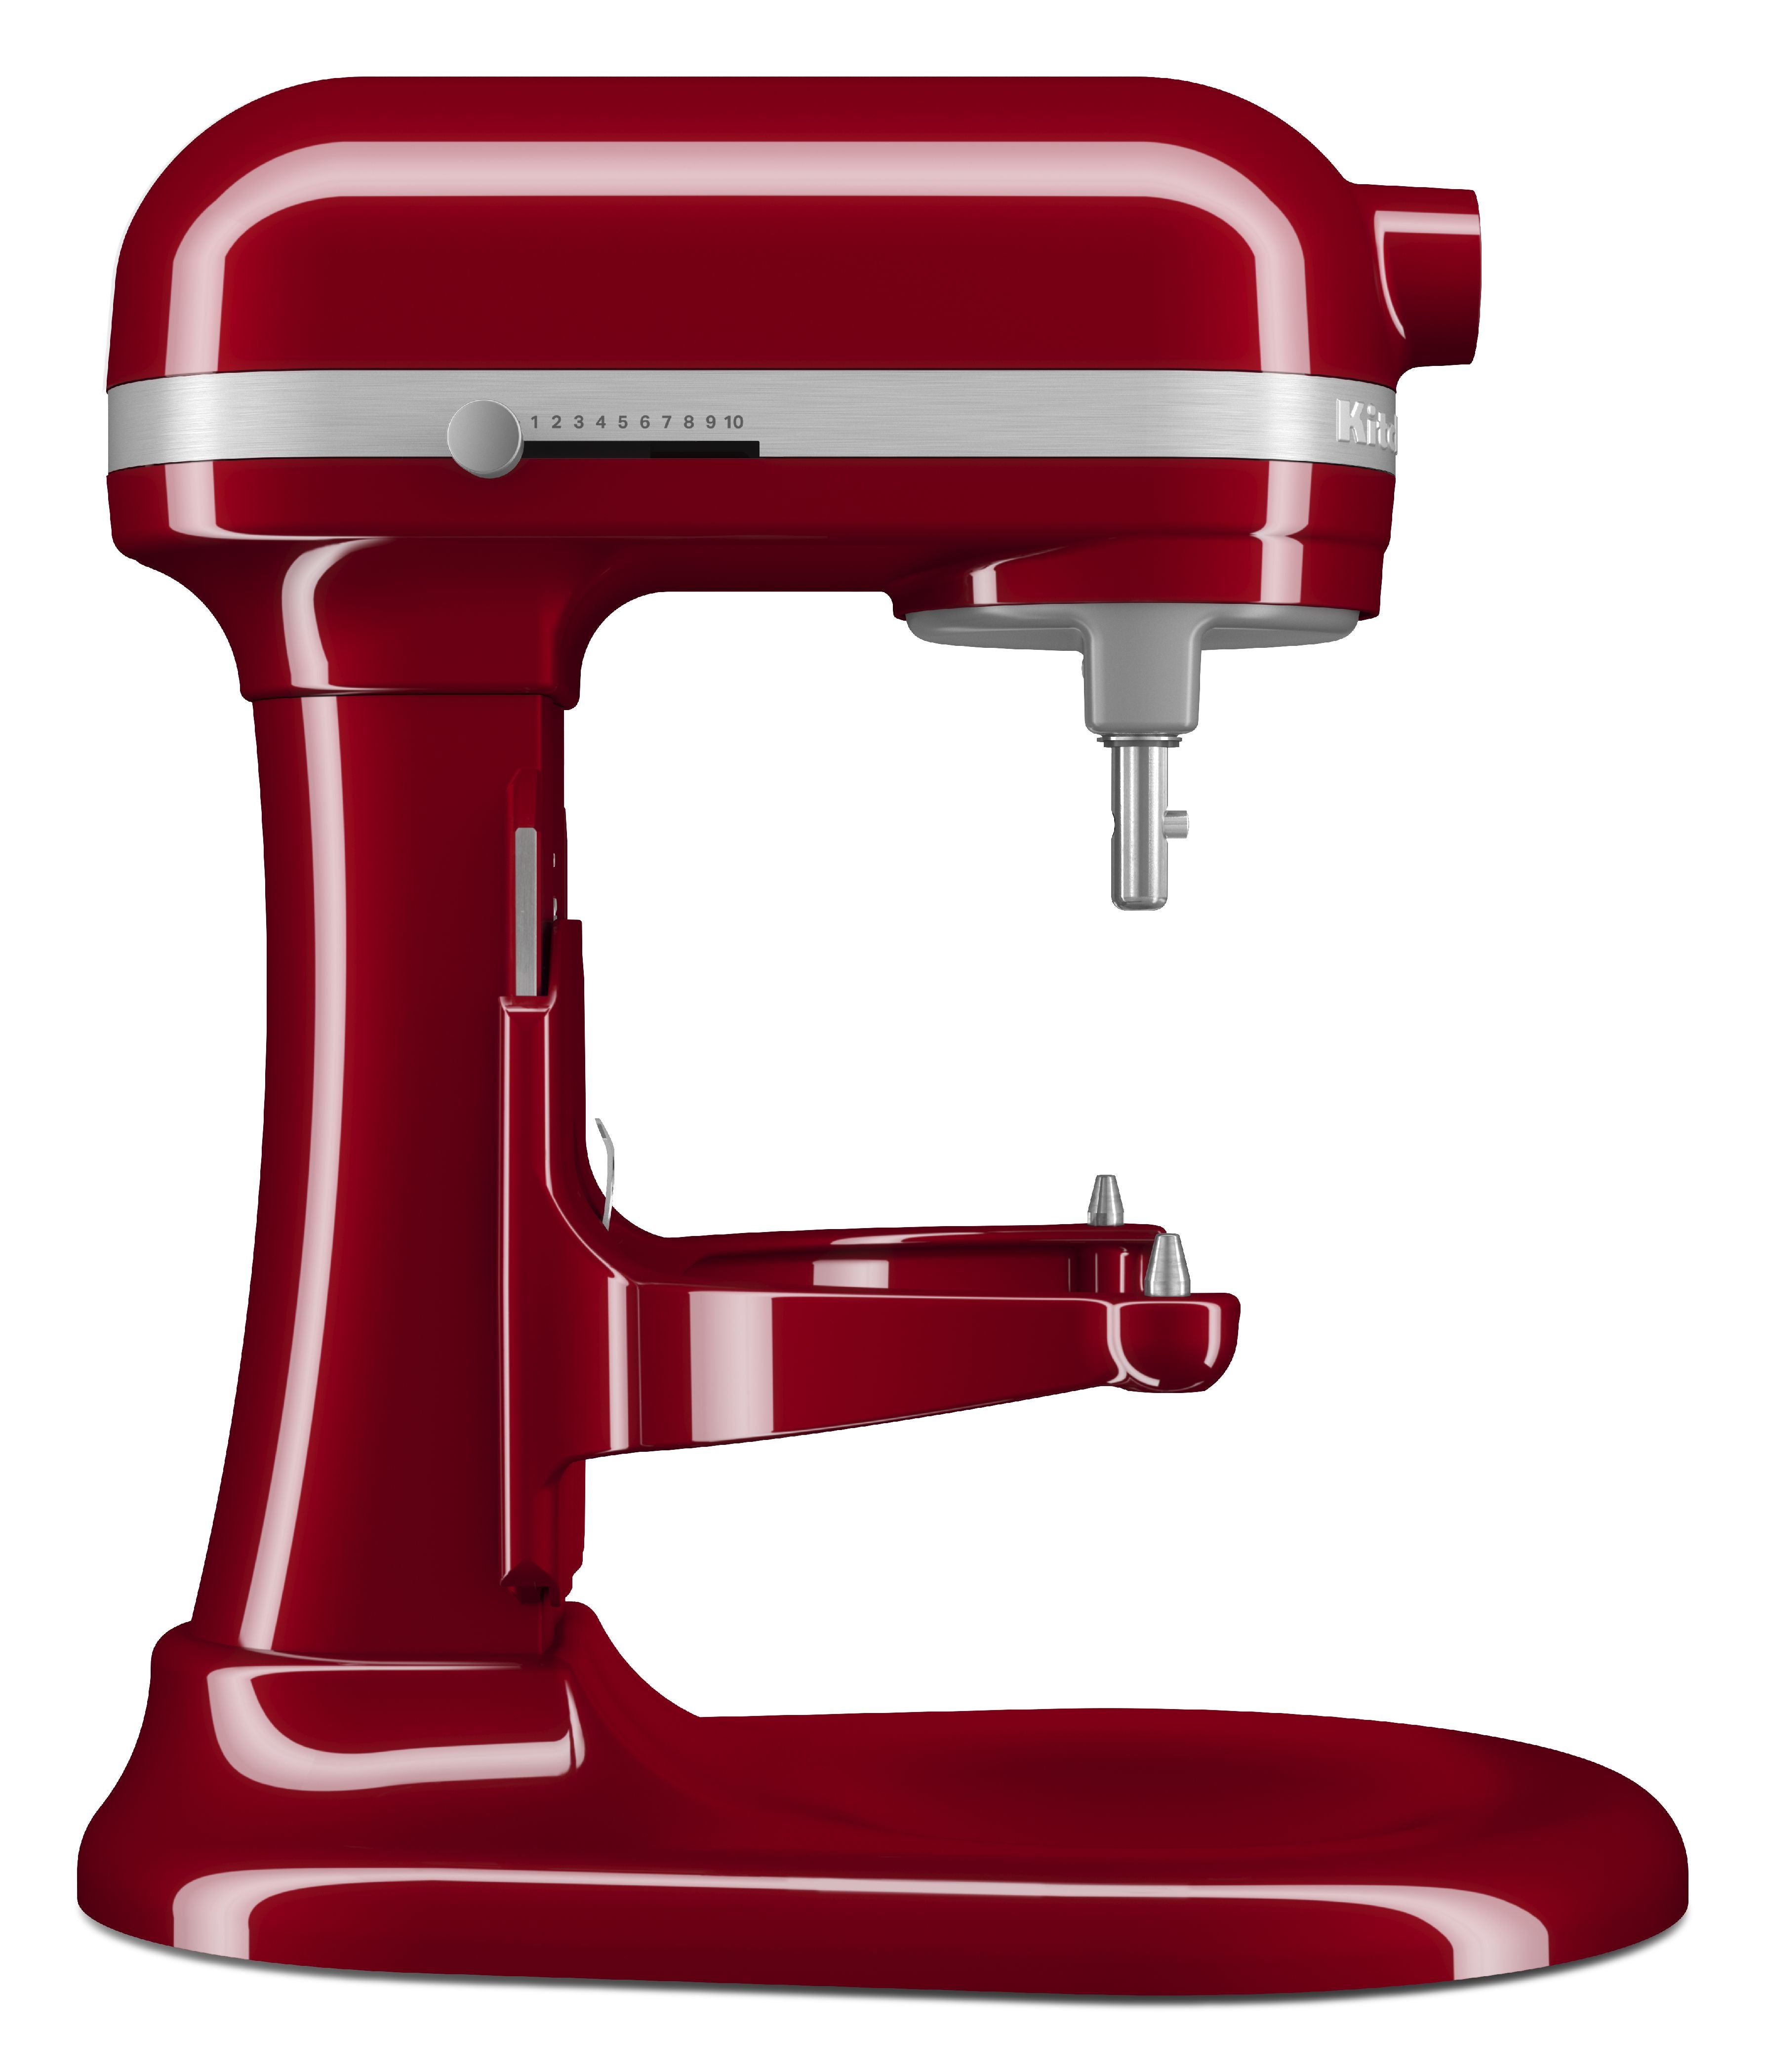 KitchenAid Heavy Duty Bowl Lift Stand Mixer 6.6 L, Empired Red